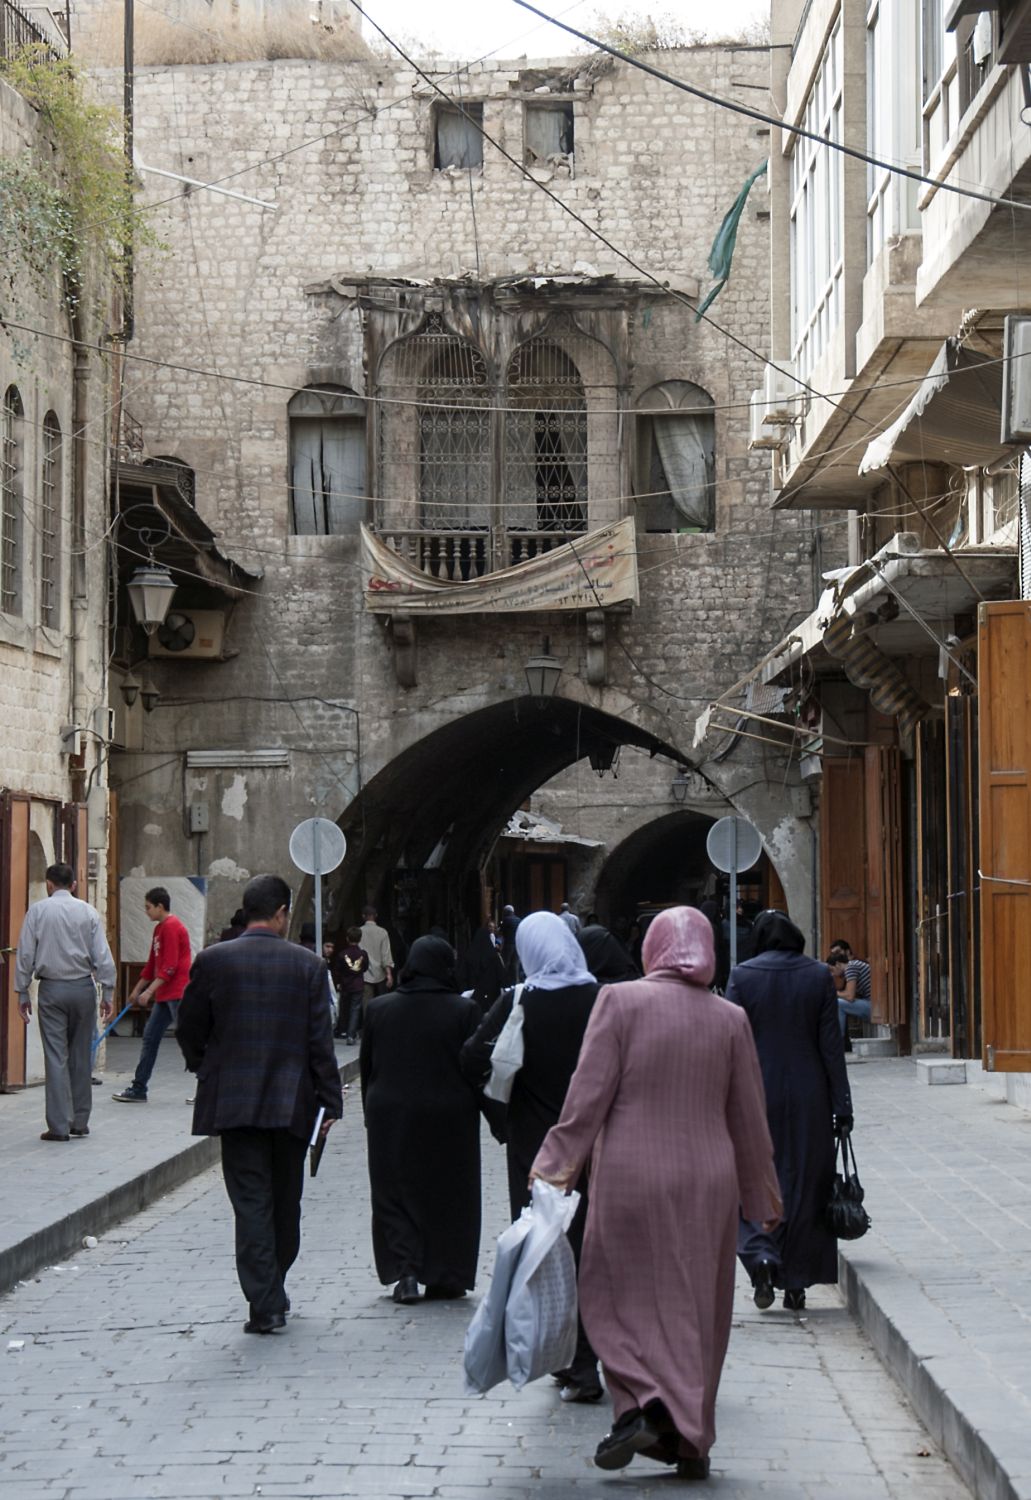 Street with arches in Aleppo, Syria.